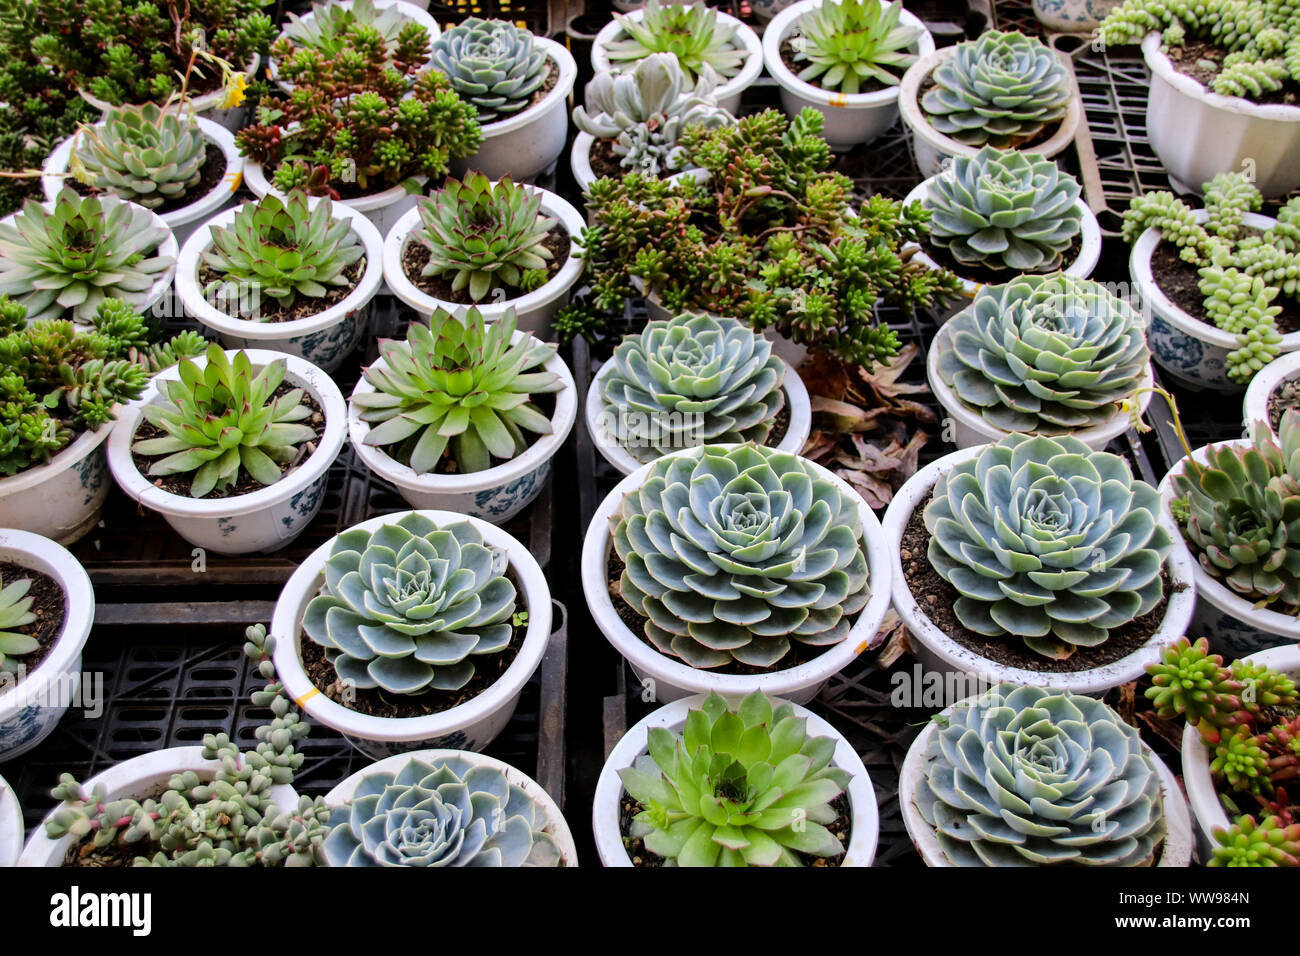 A collection of different Echeveria plants sold in a plant shop Stock Photo